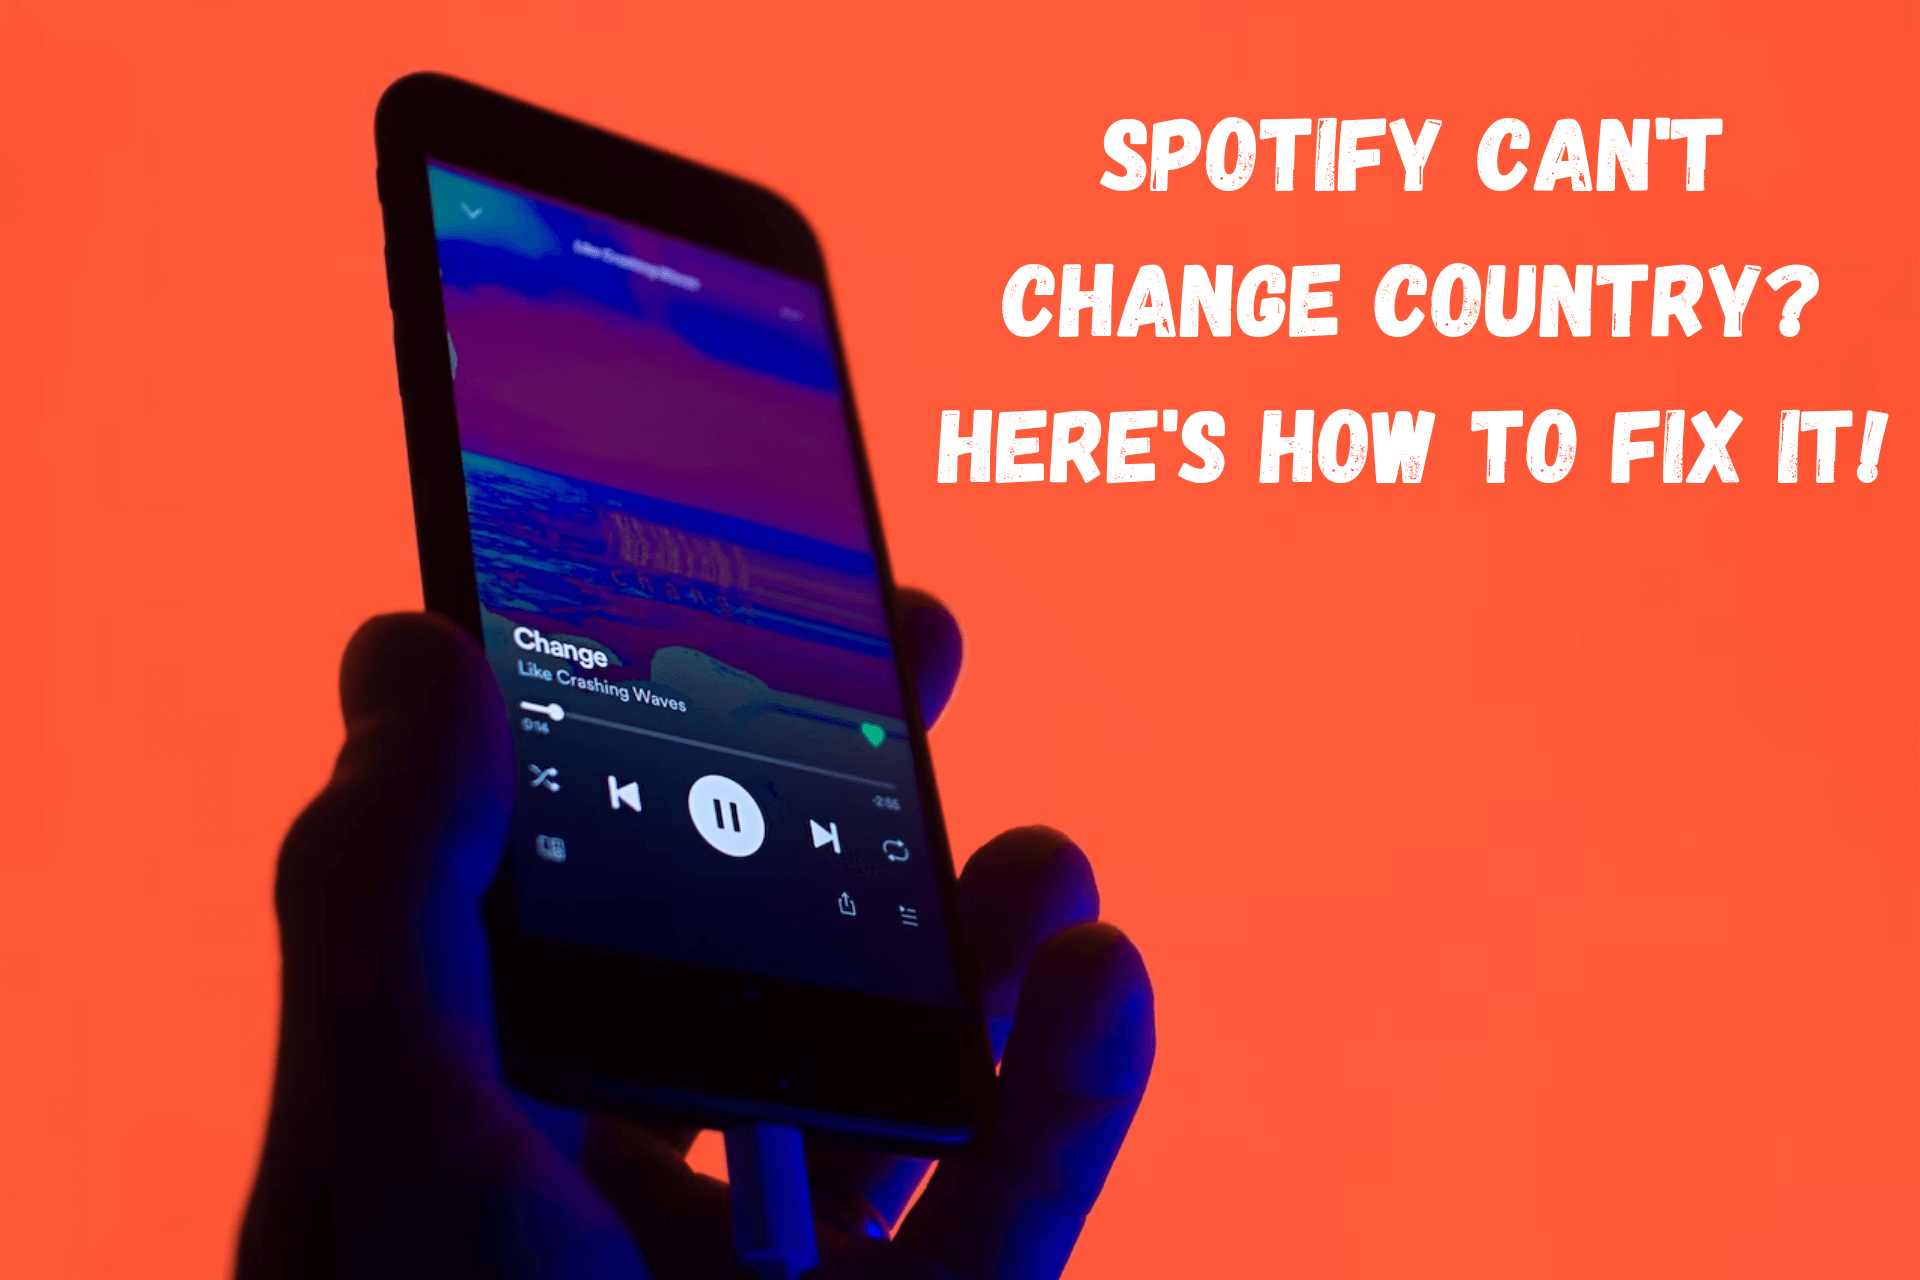 Spotify can't change country